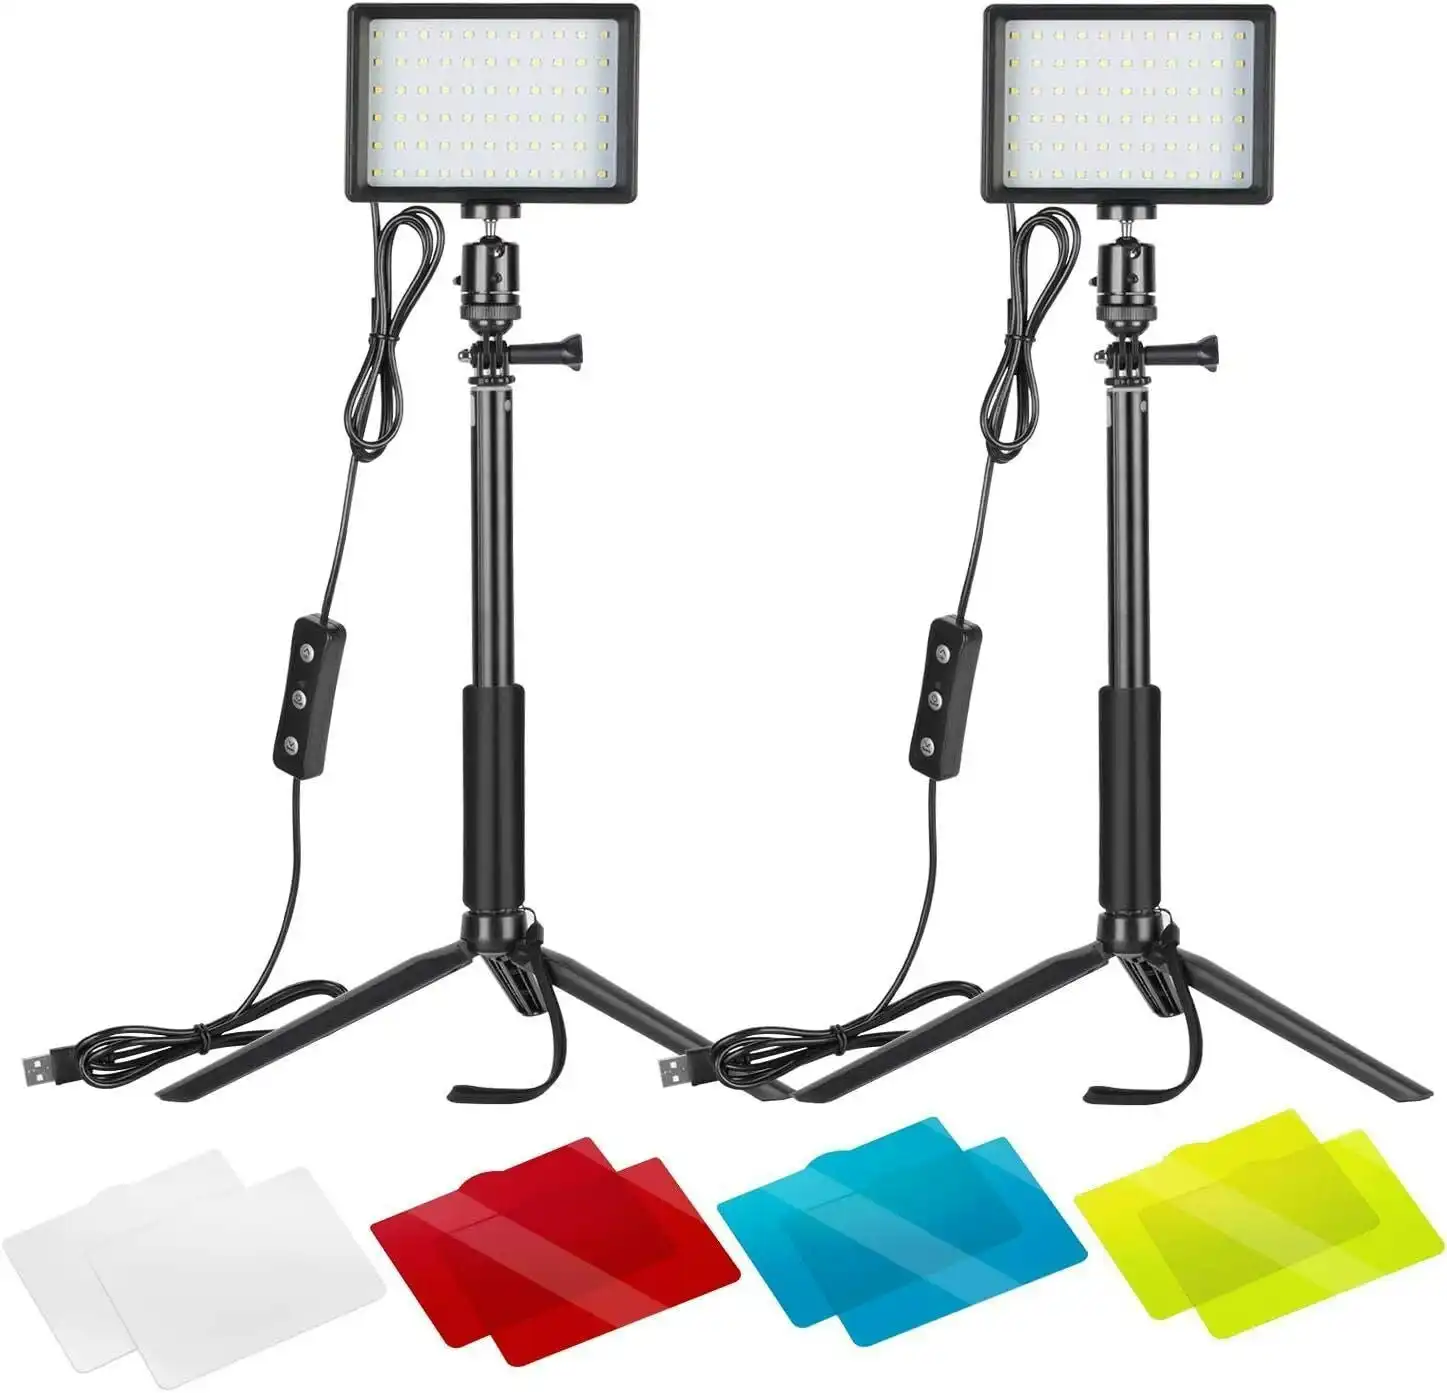 2-Pack Dimmable 5600K USB LED Video Light with Adjustable Tripod Stand